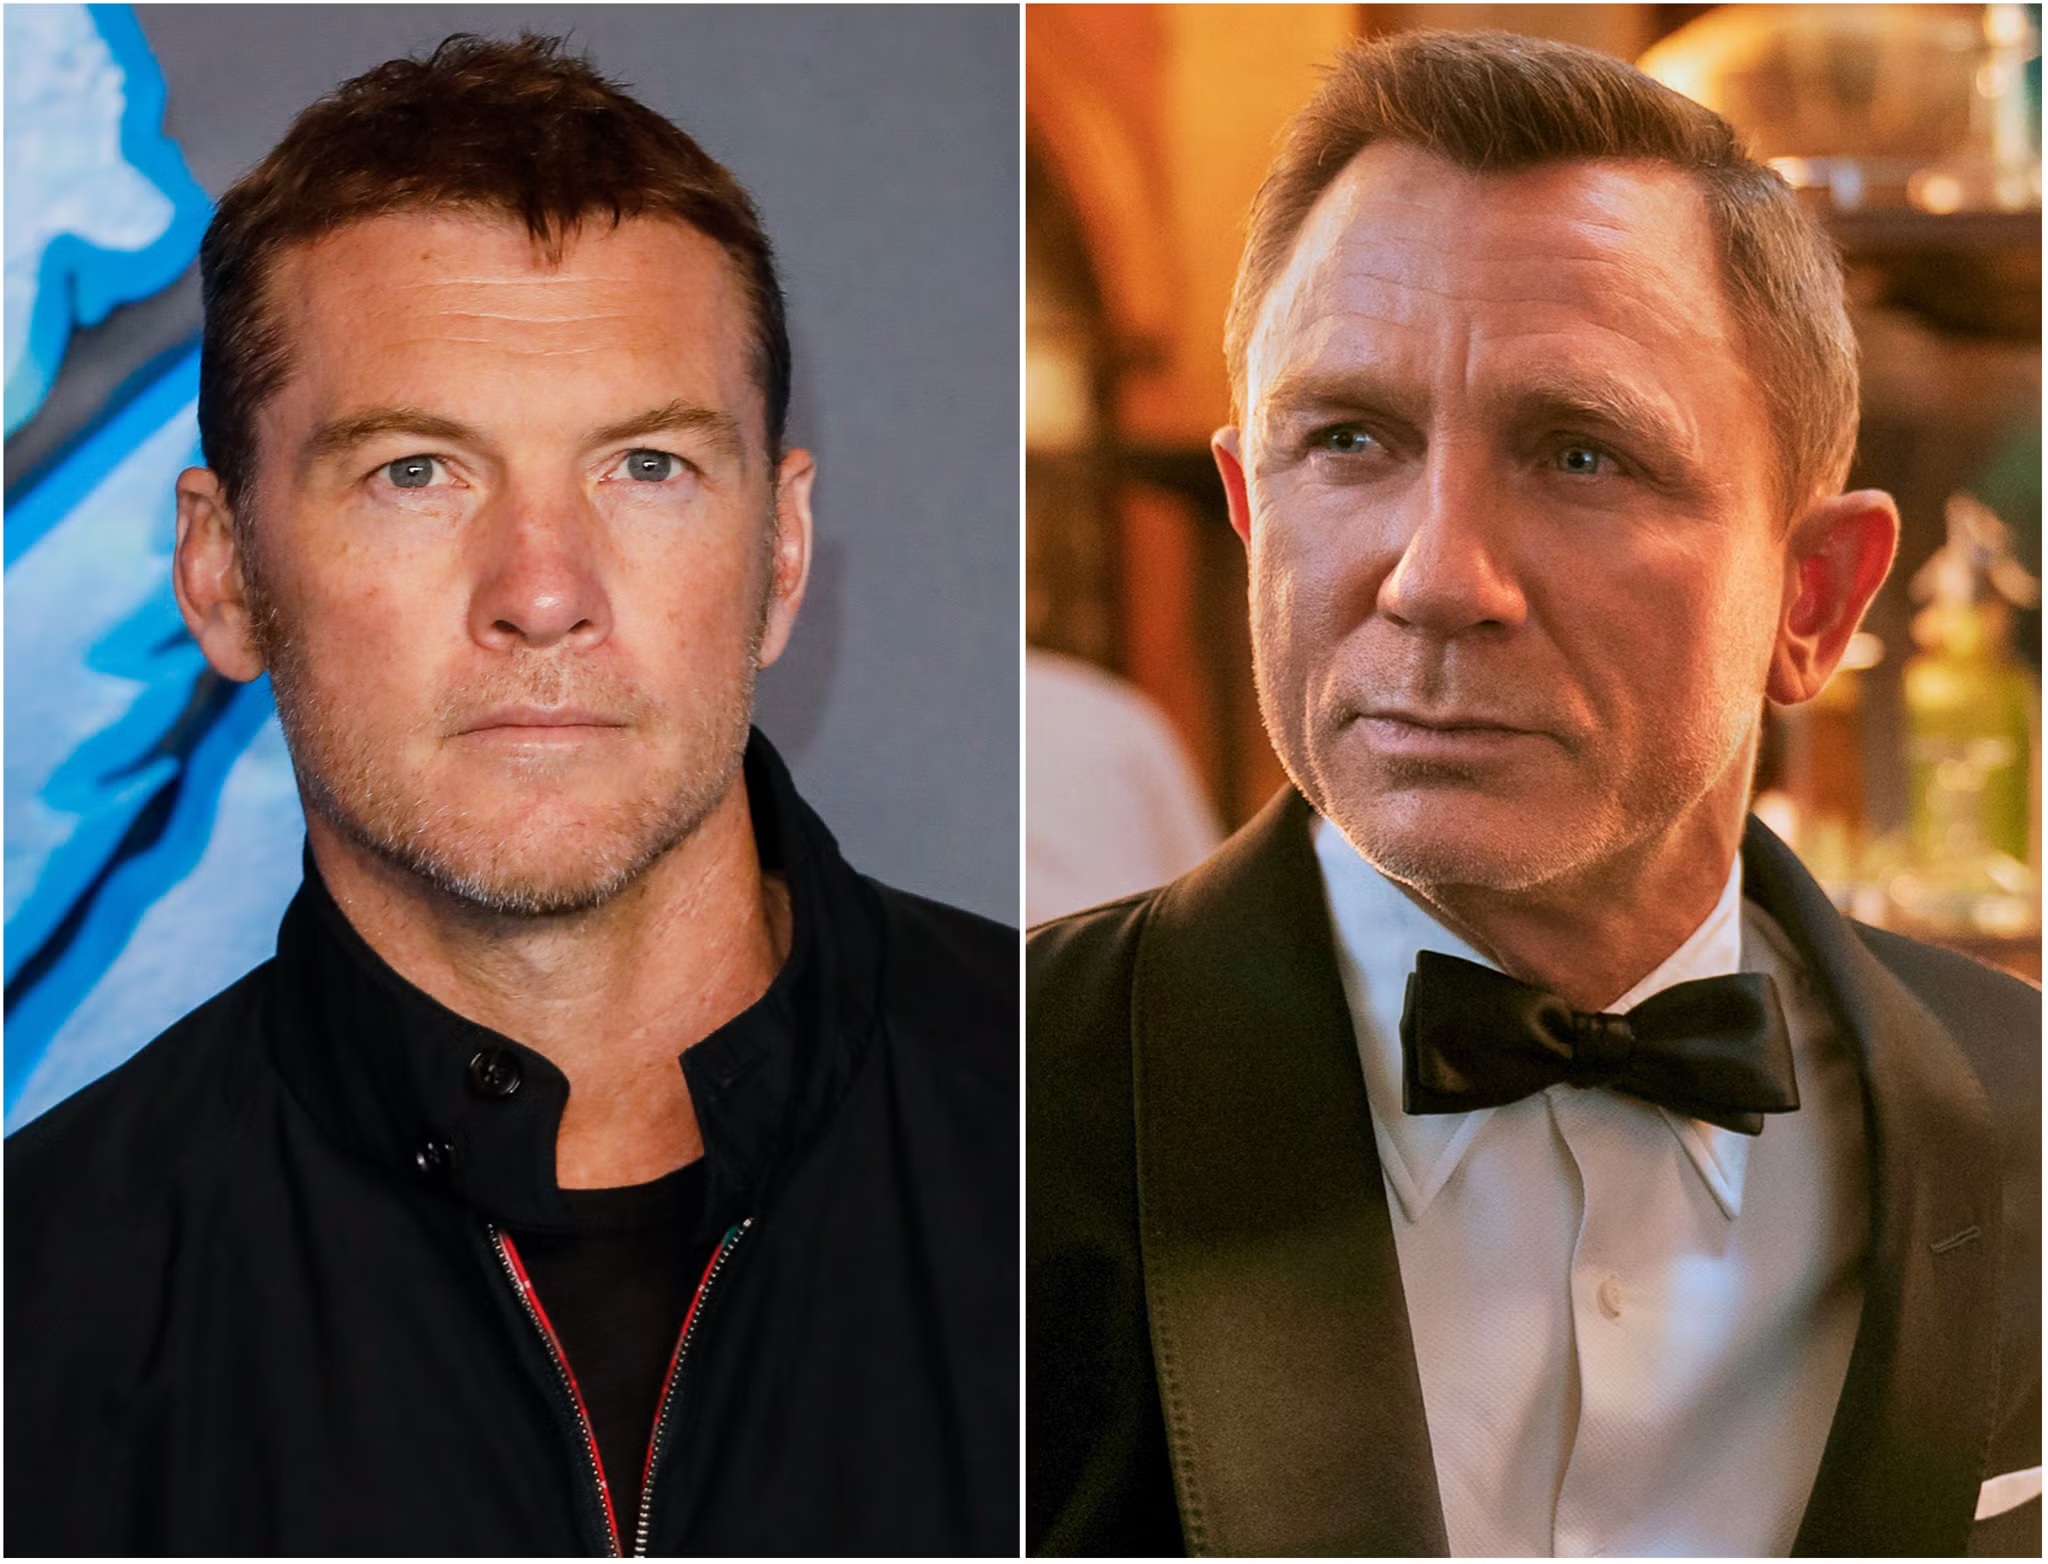 Sam Worthington explains why he lost out on James Bond role to Daniel Craig